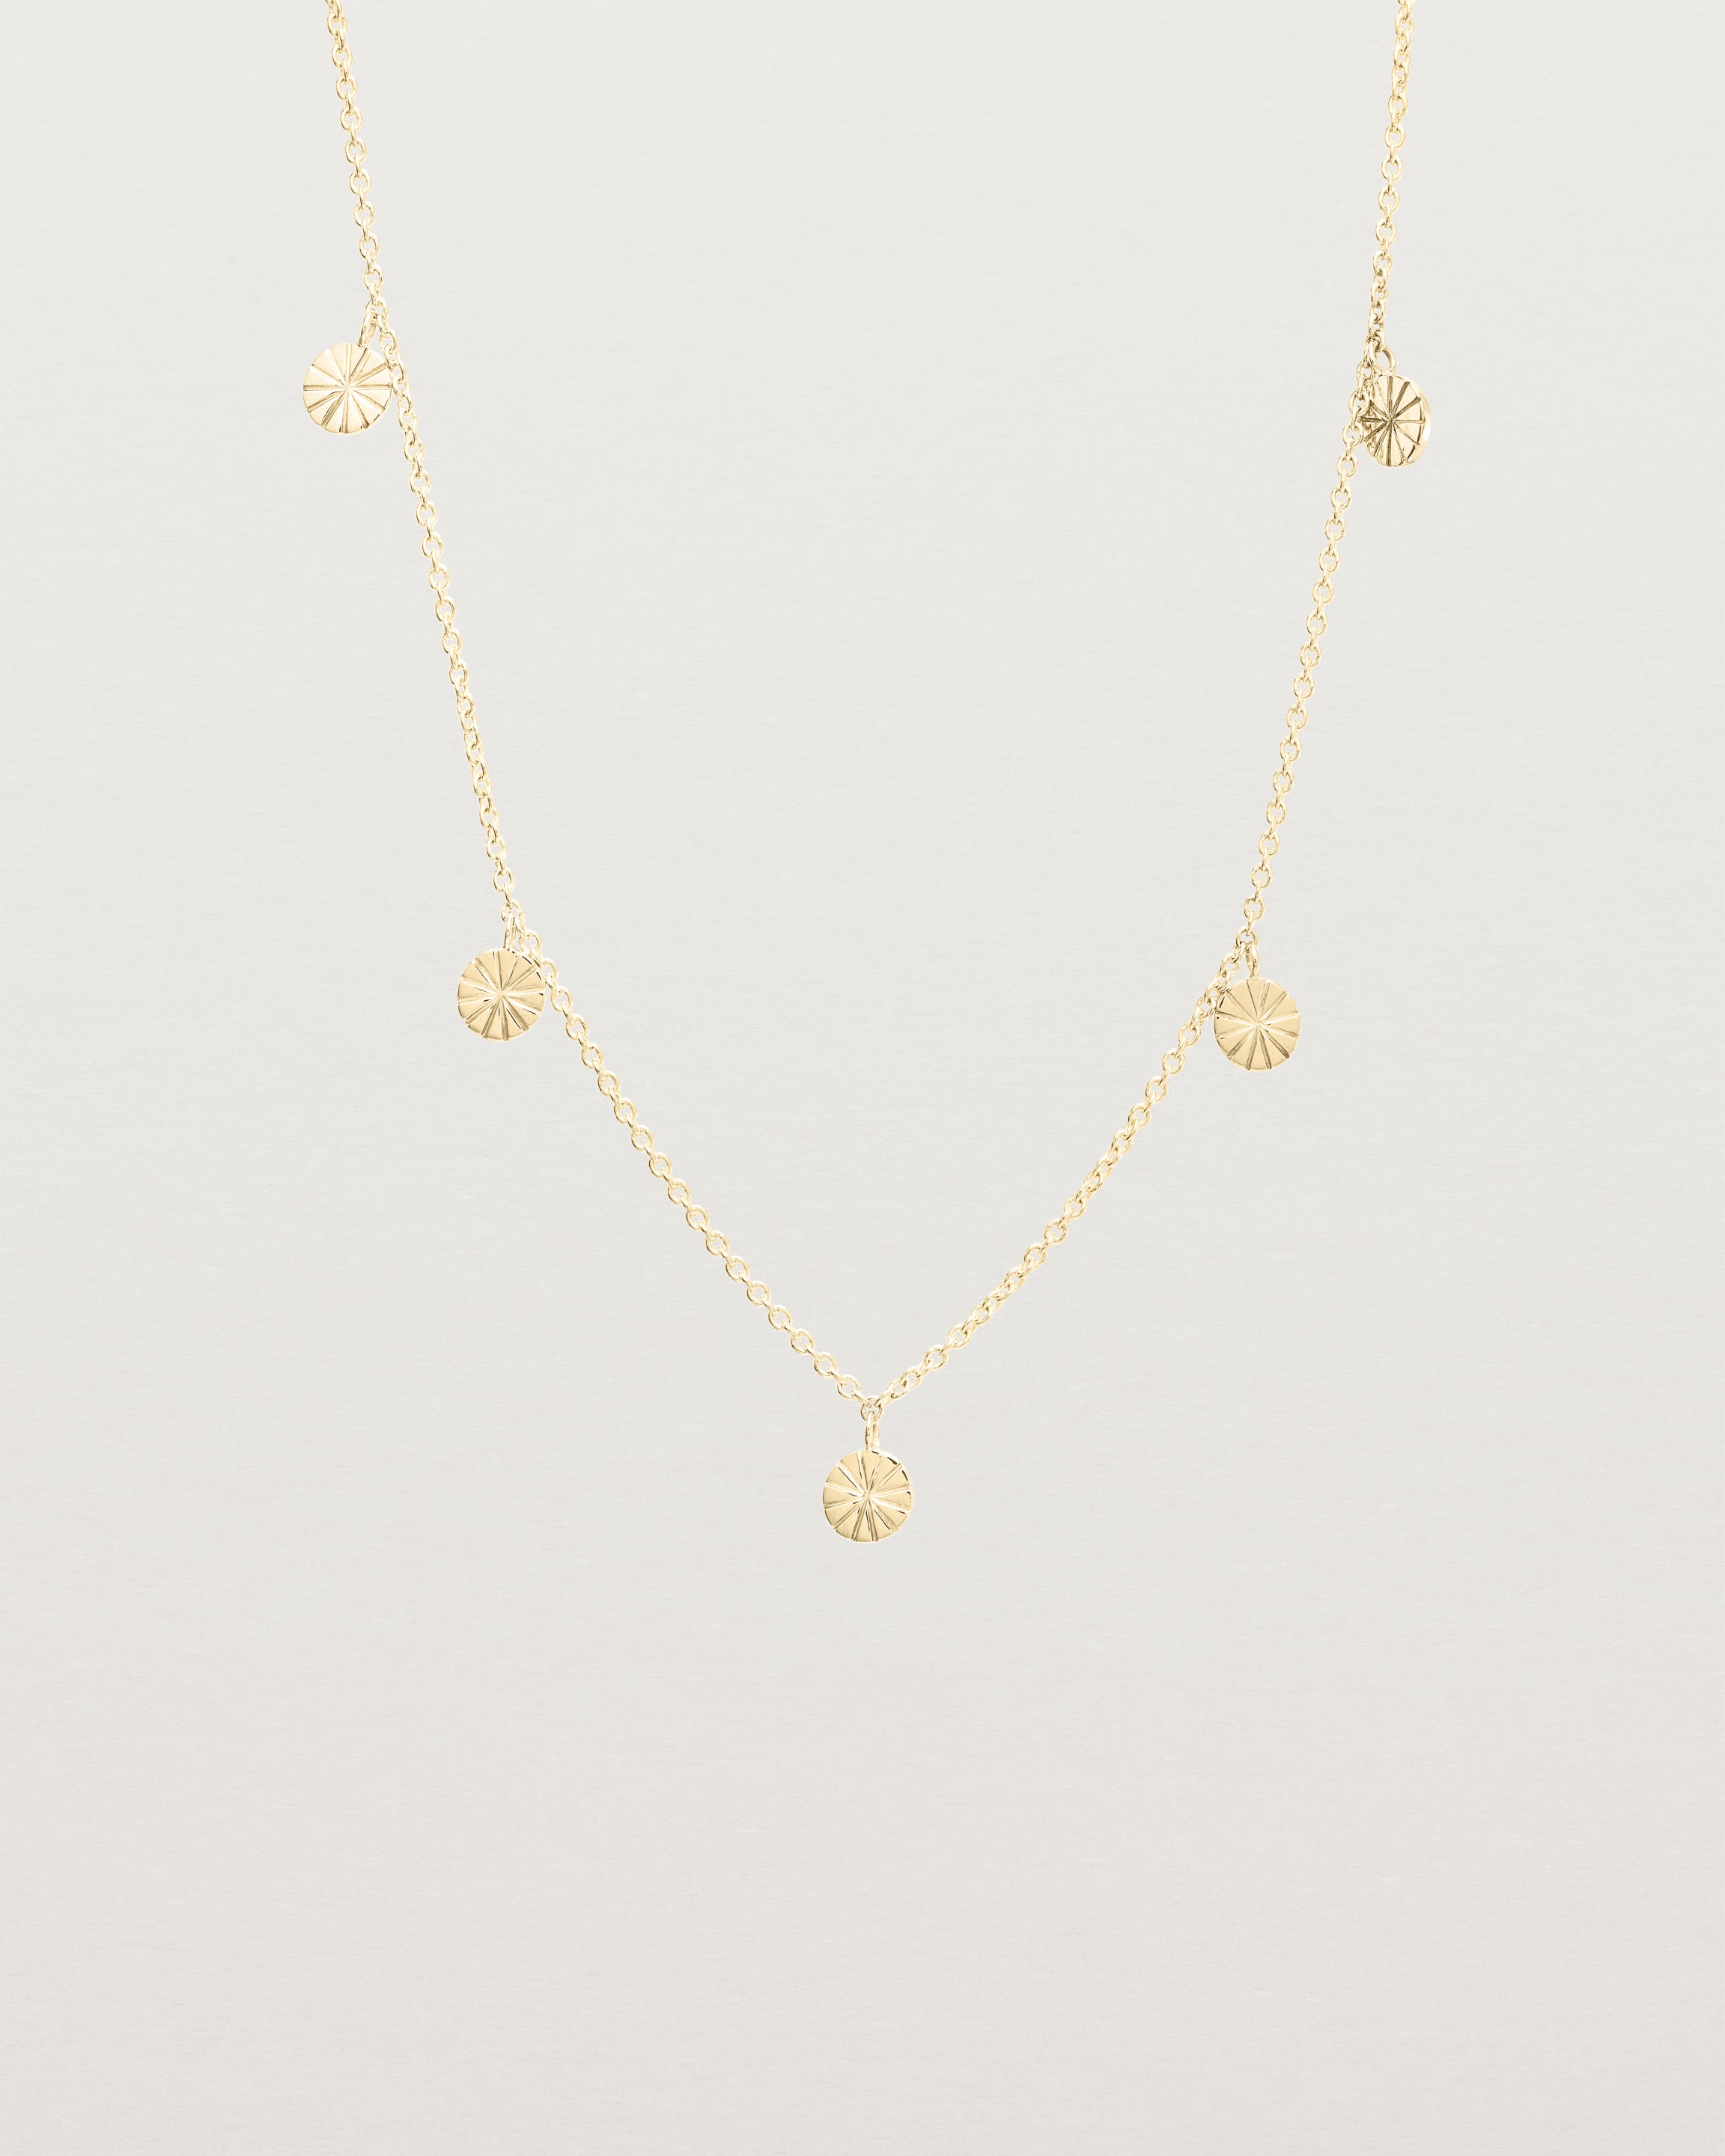 Front view of the Jia Charm Necklace | Yellow Gold.